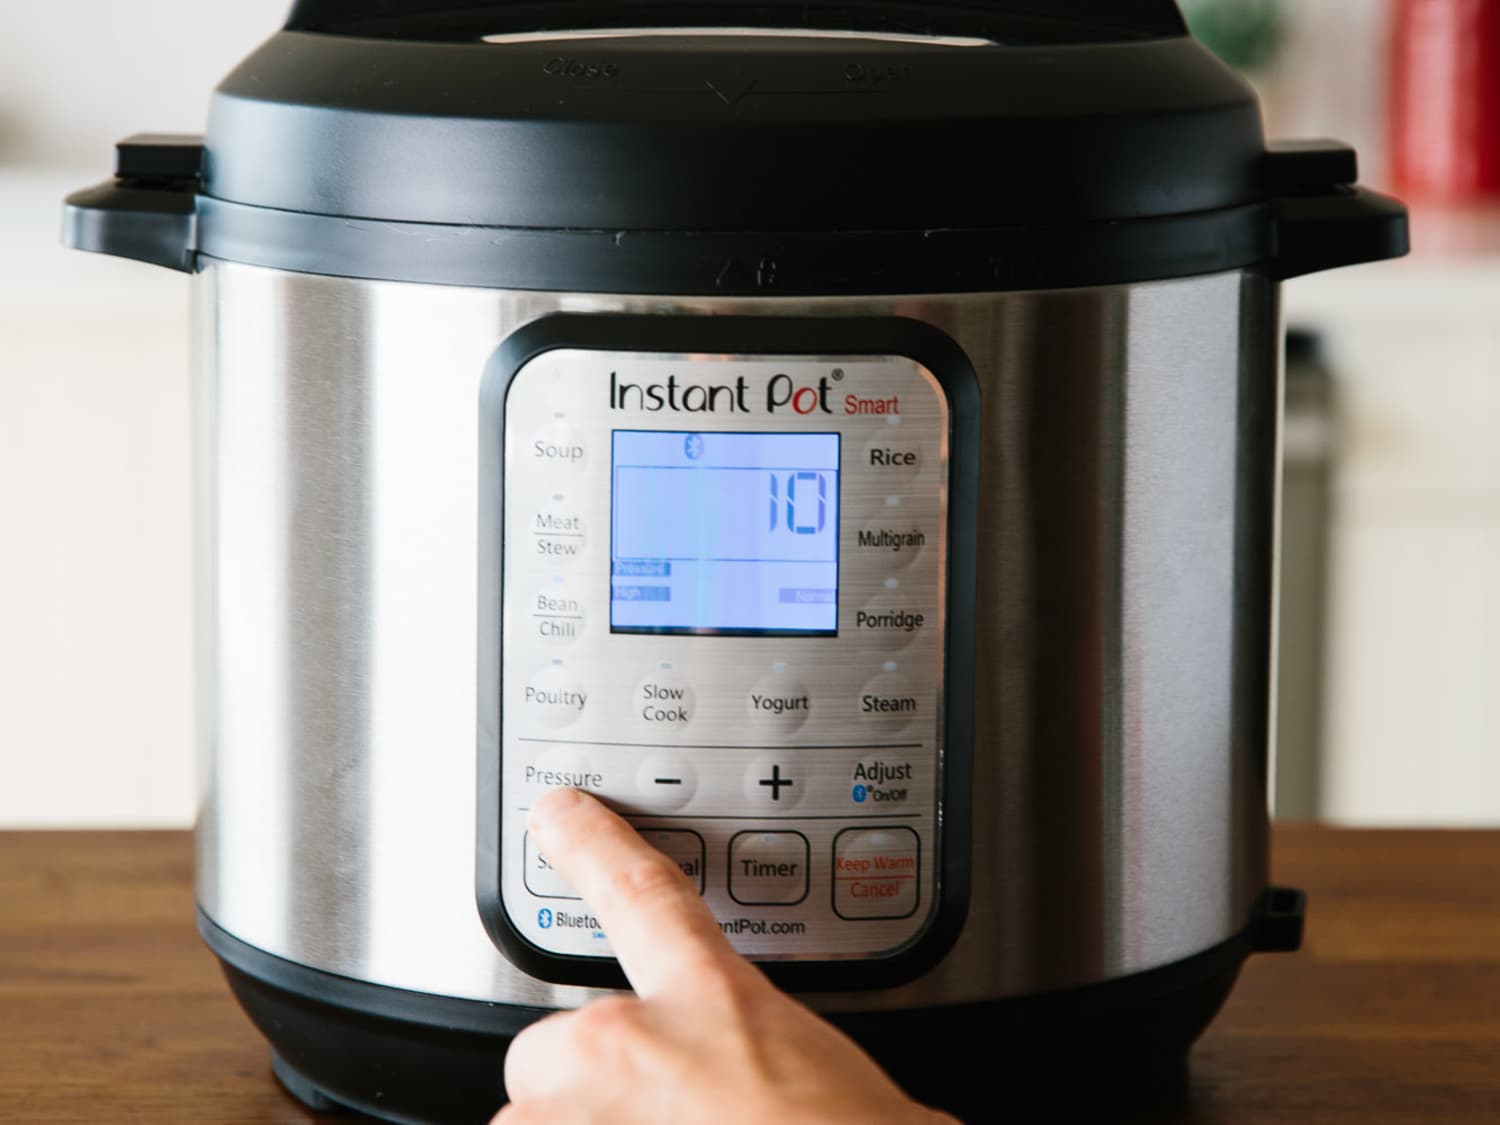 5 Mistakes to Avoid When Using an Electric Pressure Cooker  Pressure cooker  soup recipes, Electric pressure cooker, Electric pressure cooker recipes